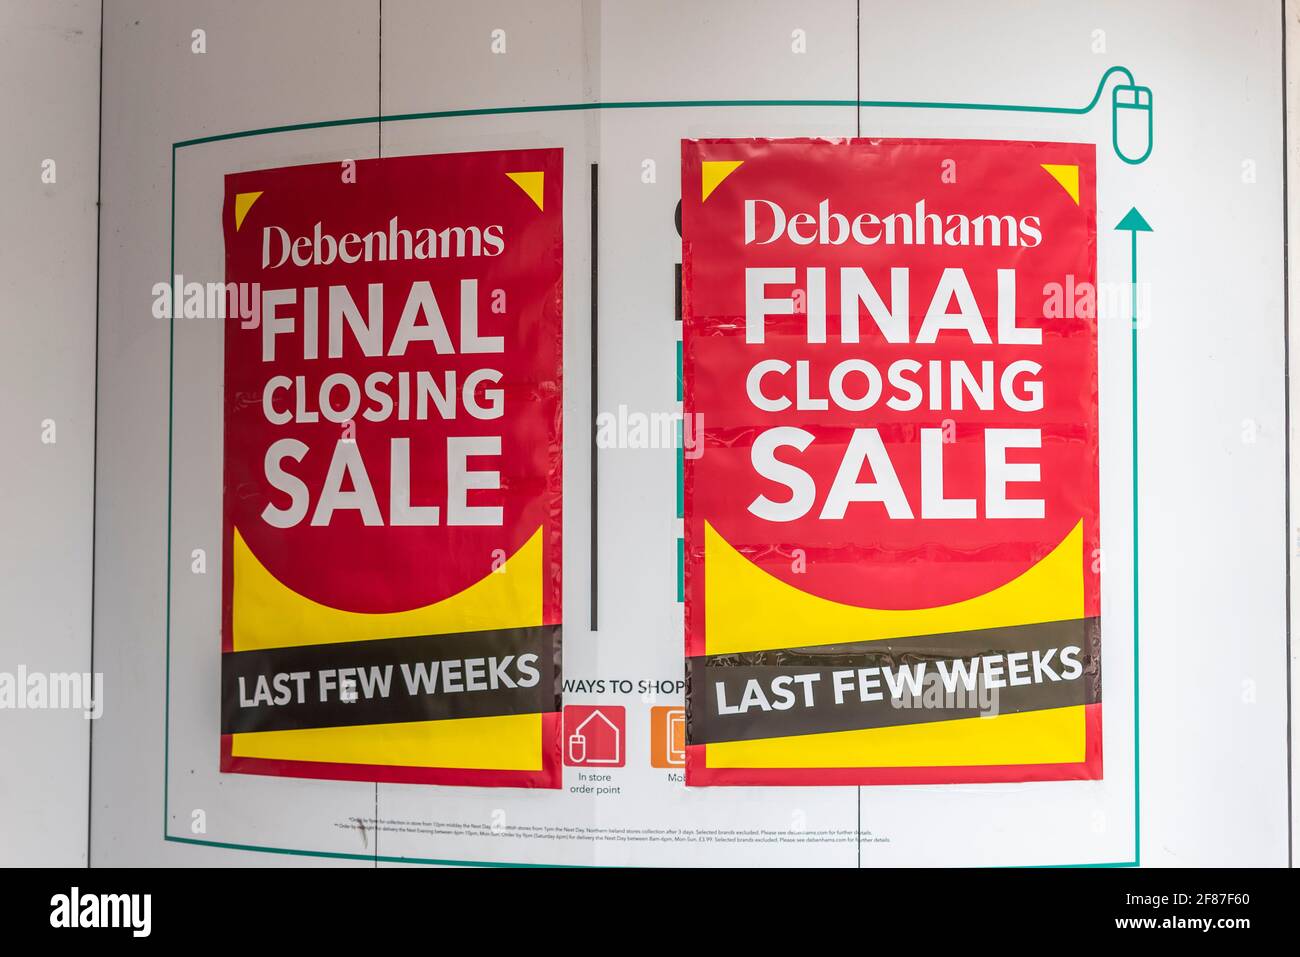 Debenhams store in High Street, Southend on Sea, Essex, UK, with closing down sale signs in the window display. Final closing, shut Stock Photo